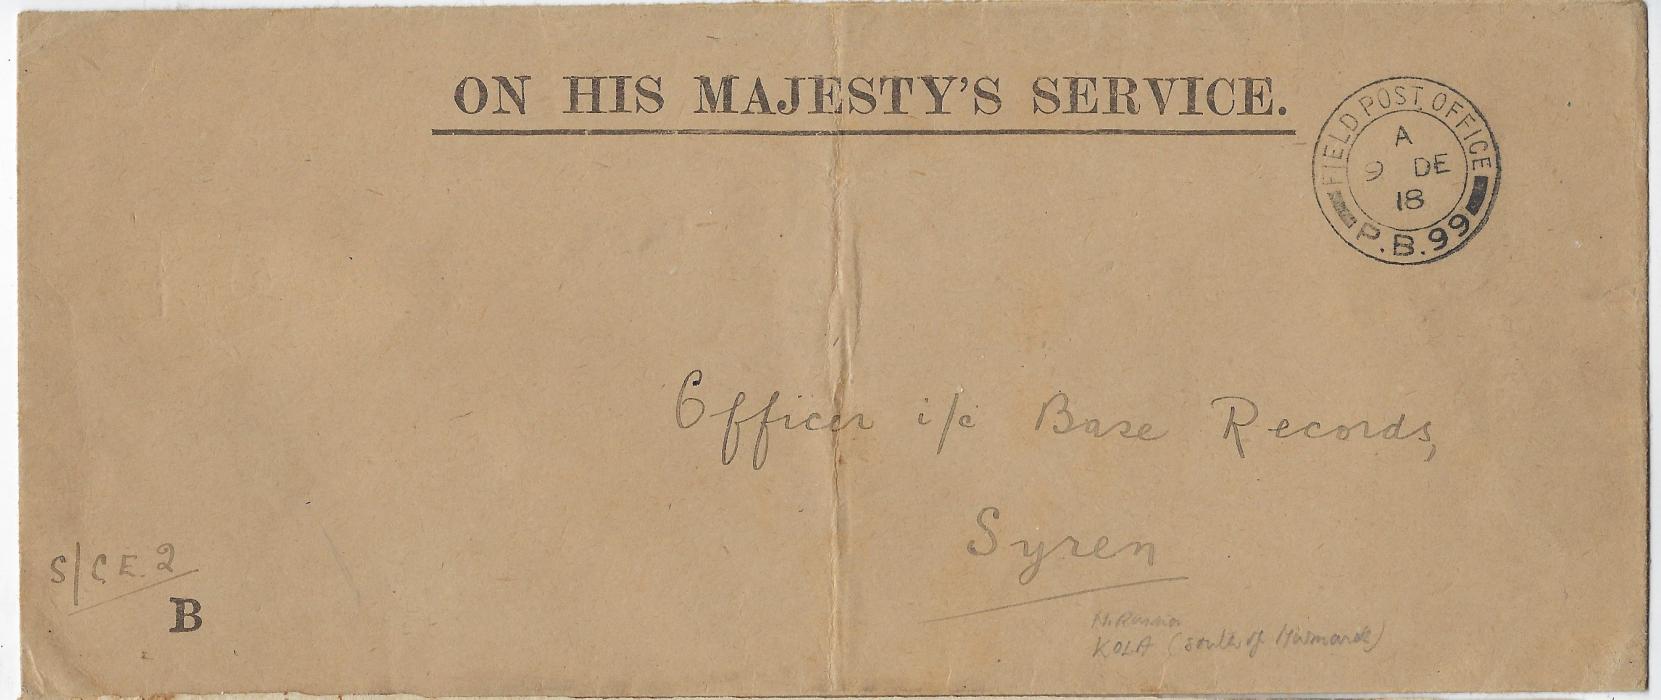 Russia (British North Russian Expeditionary Forces) 1918 (9 DE) ON HIS MAJESTY’s SERVICE envelope addressed to “Officer i/c Base Records/ Syren”  bearing very fine strike of FIELD POST OFFICE P.B.99 datestamp, in use at Kola at this time. Central vertical fold, a scarce item